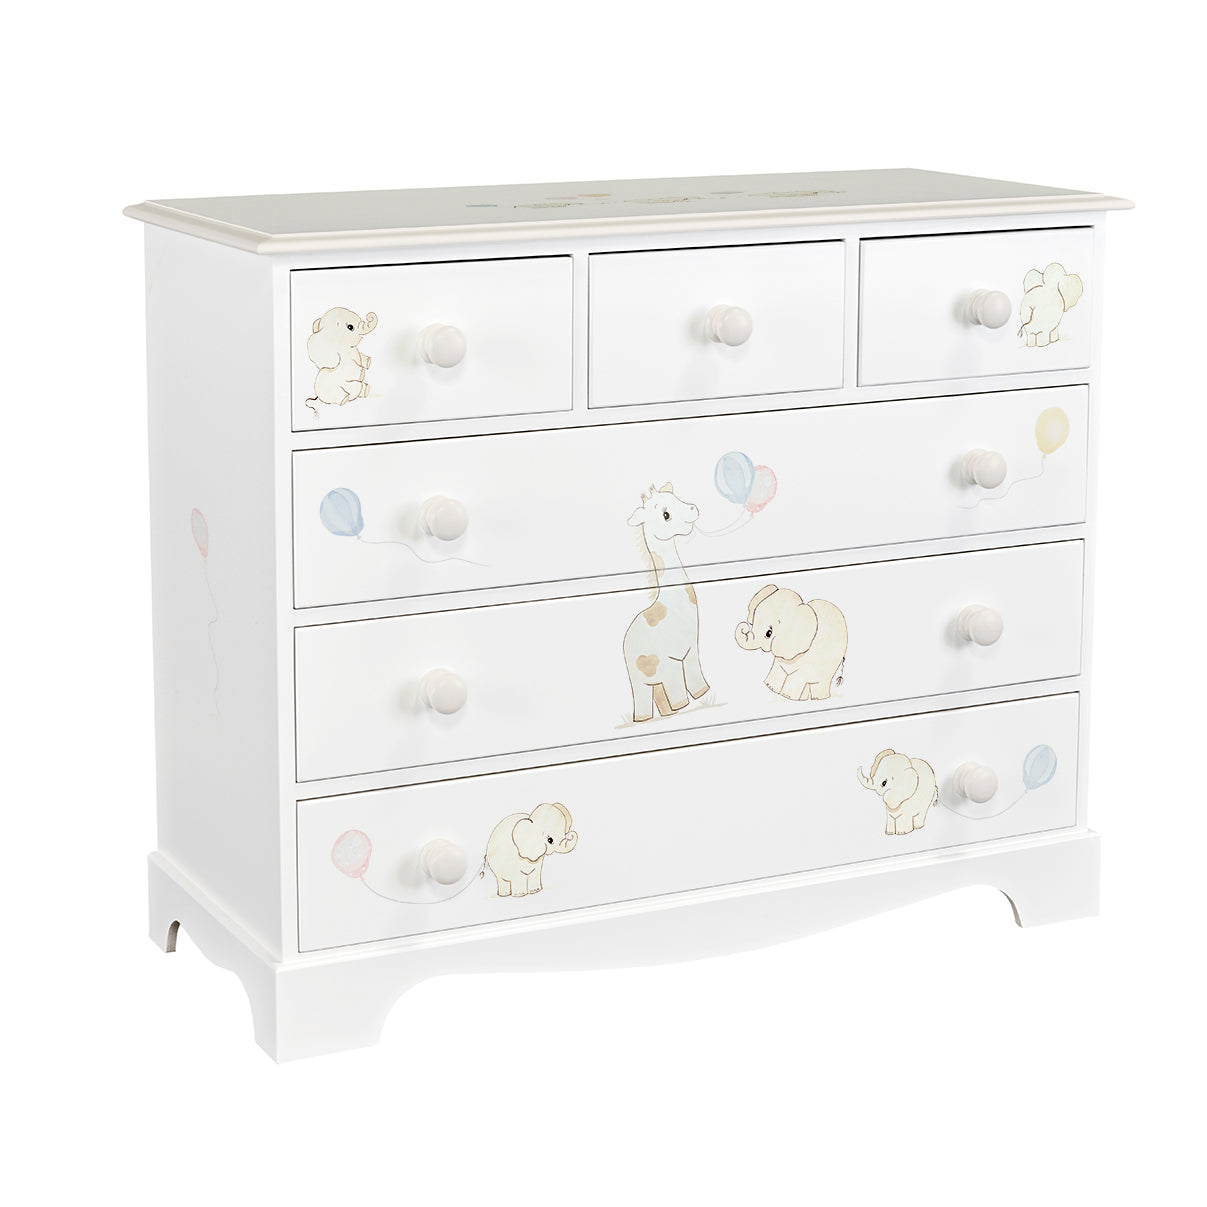 Extra Large Chest of Drawers - Playful Elephants with Soft Jute Trim